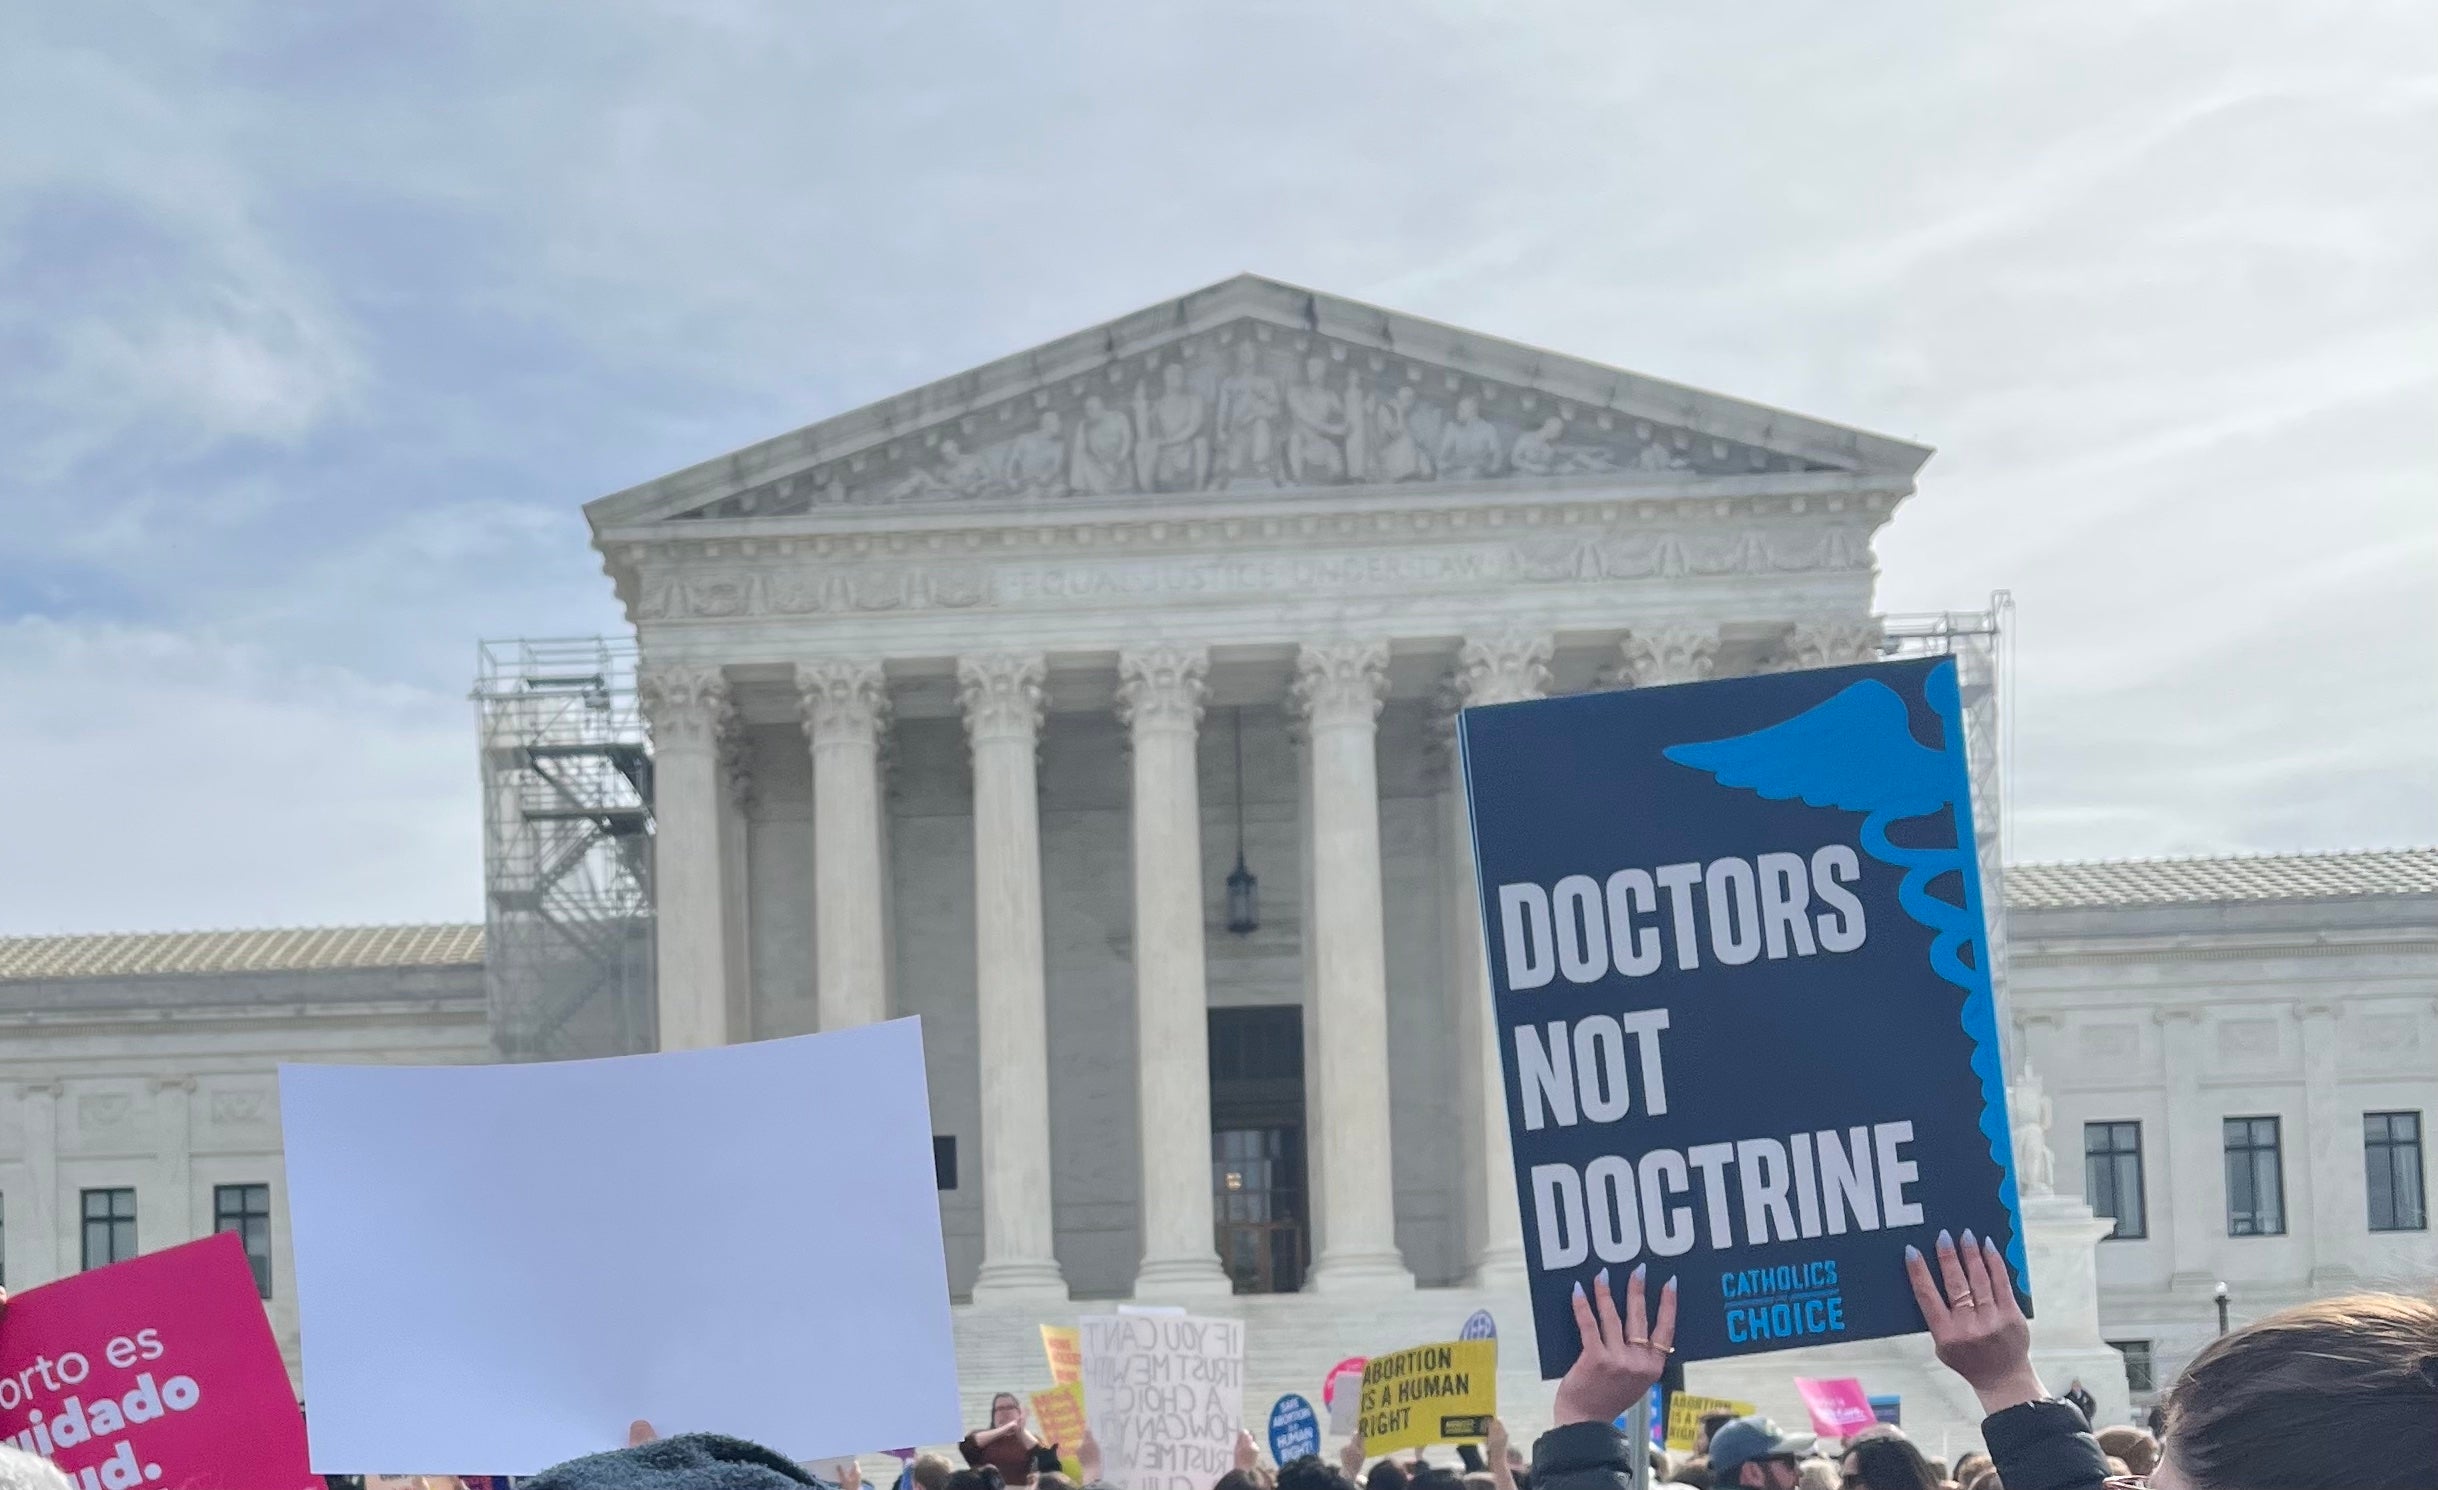 A pro-choice demonstrator holds a sign that reads, “Doctors not doctrine.”